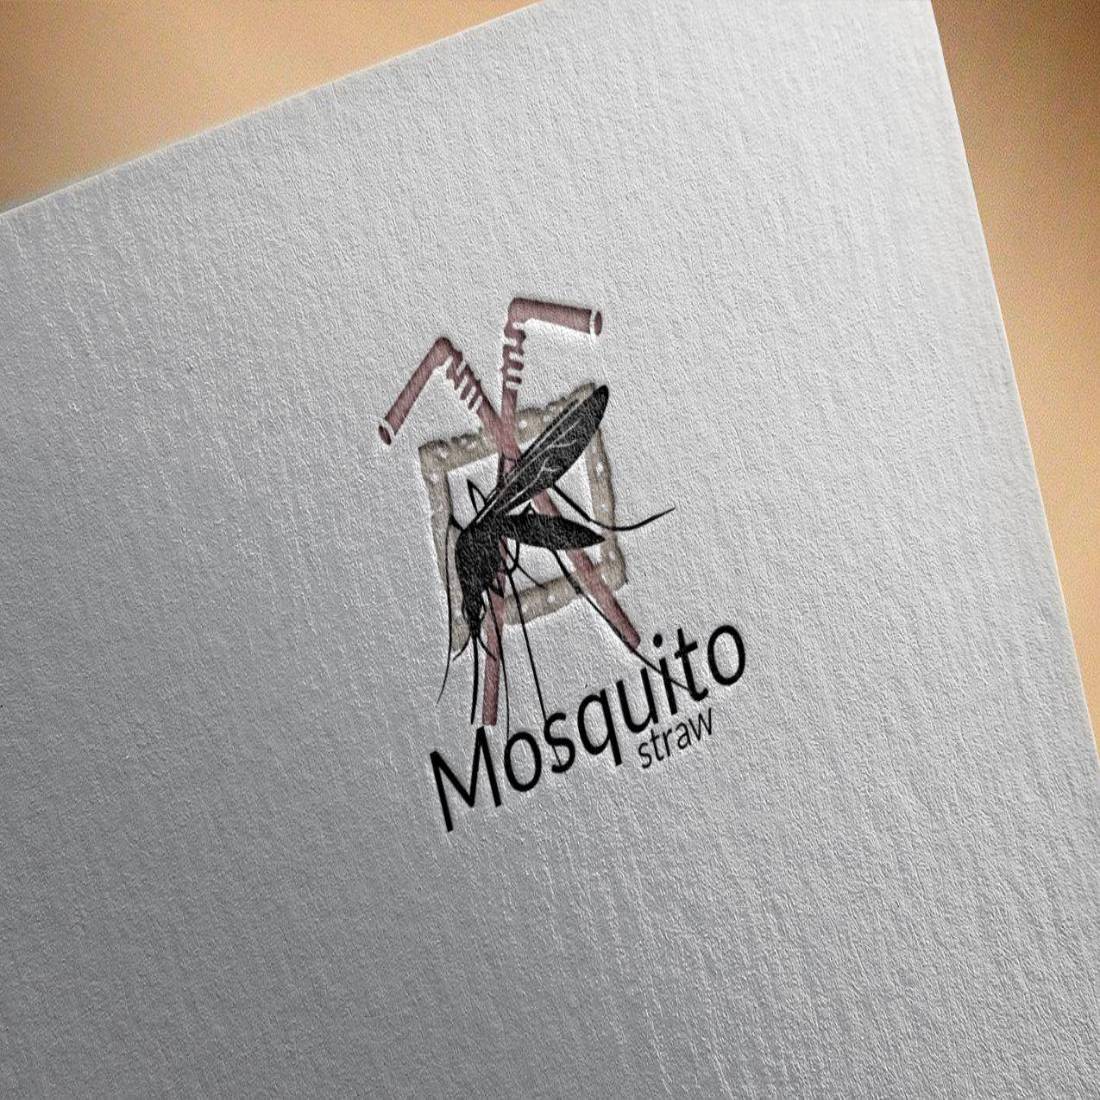 Insect Logo Design cover image.